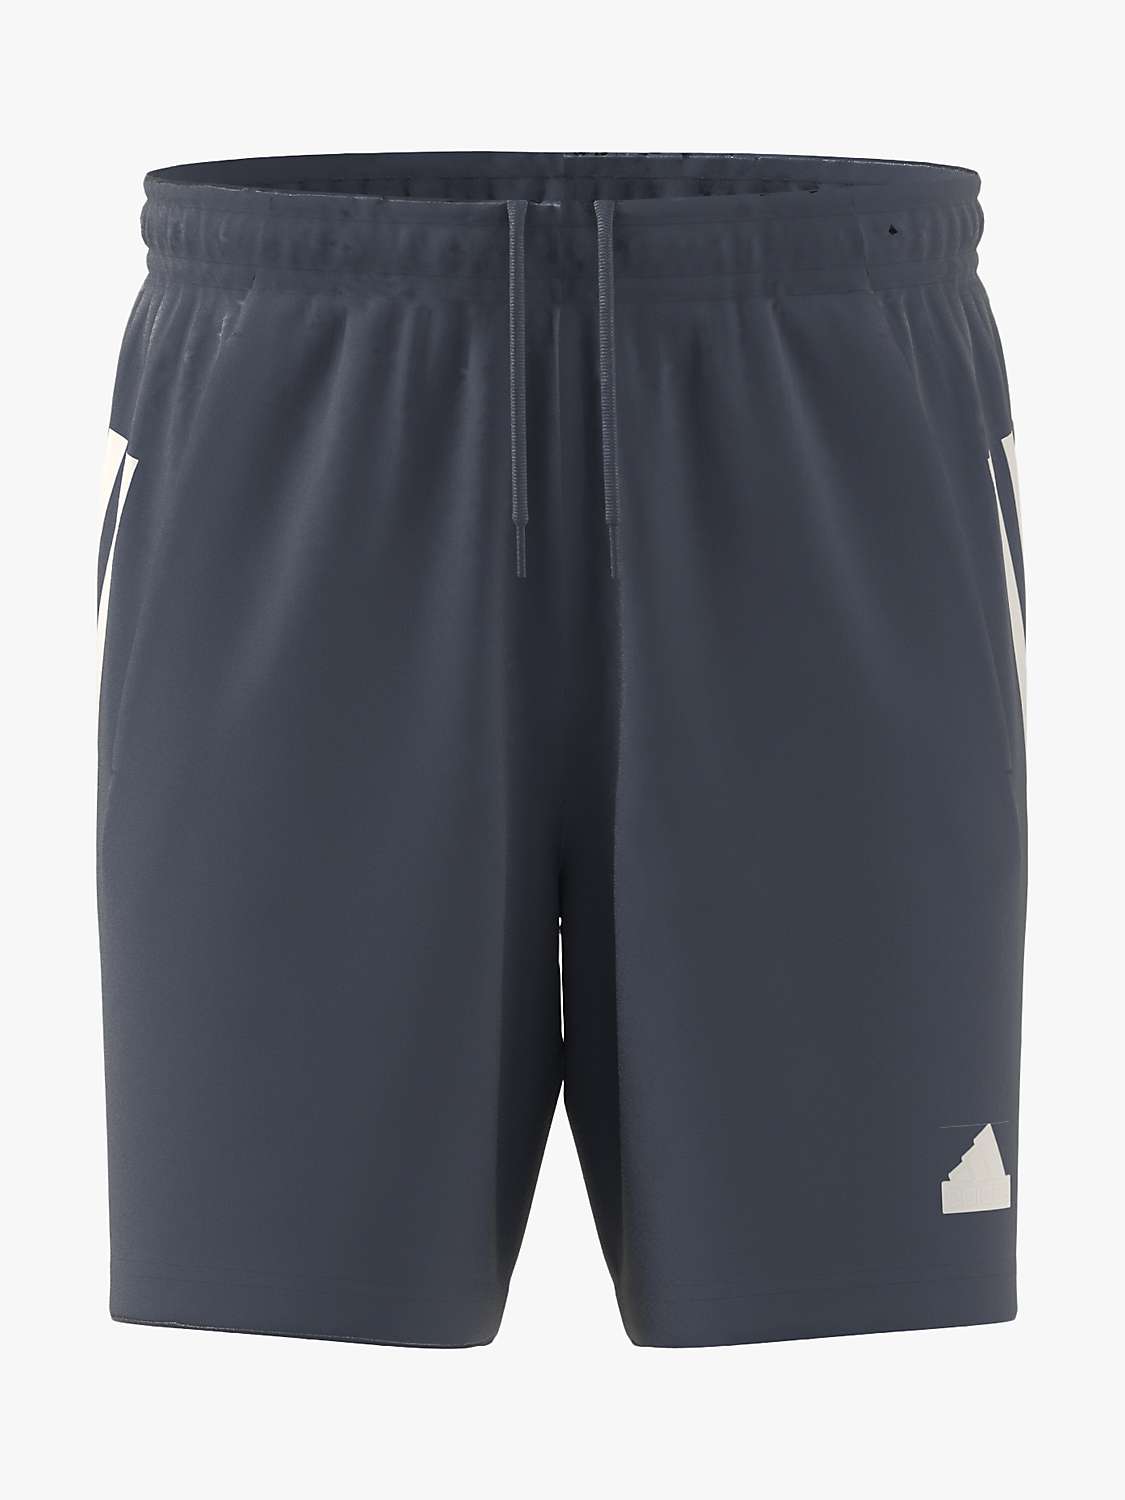 Buy adidas Future Icons 3-Stripes Shorts, Preloved Ink Online at johnlewis.com